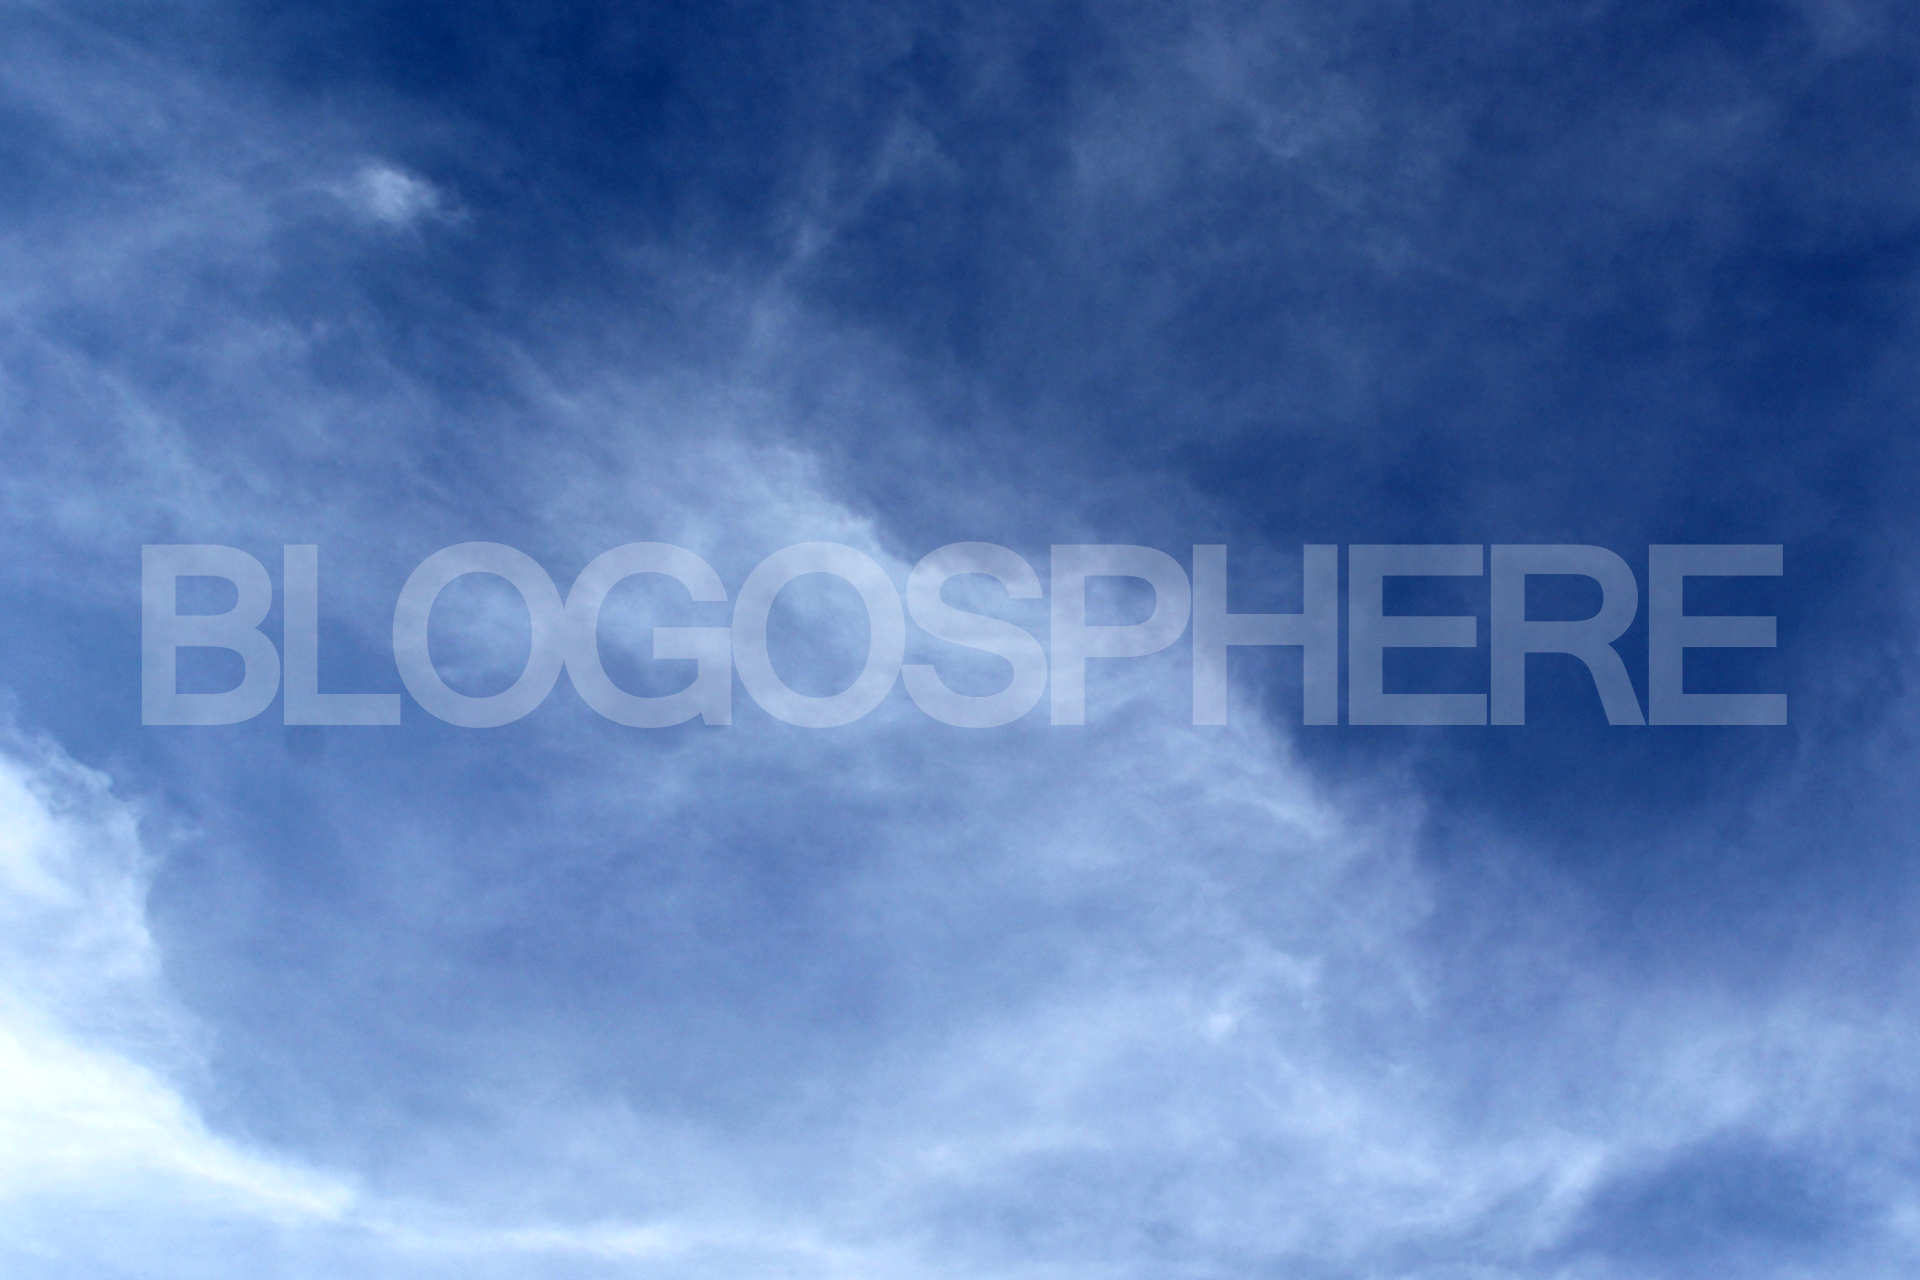 Top of the Blogosphere